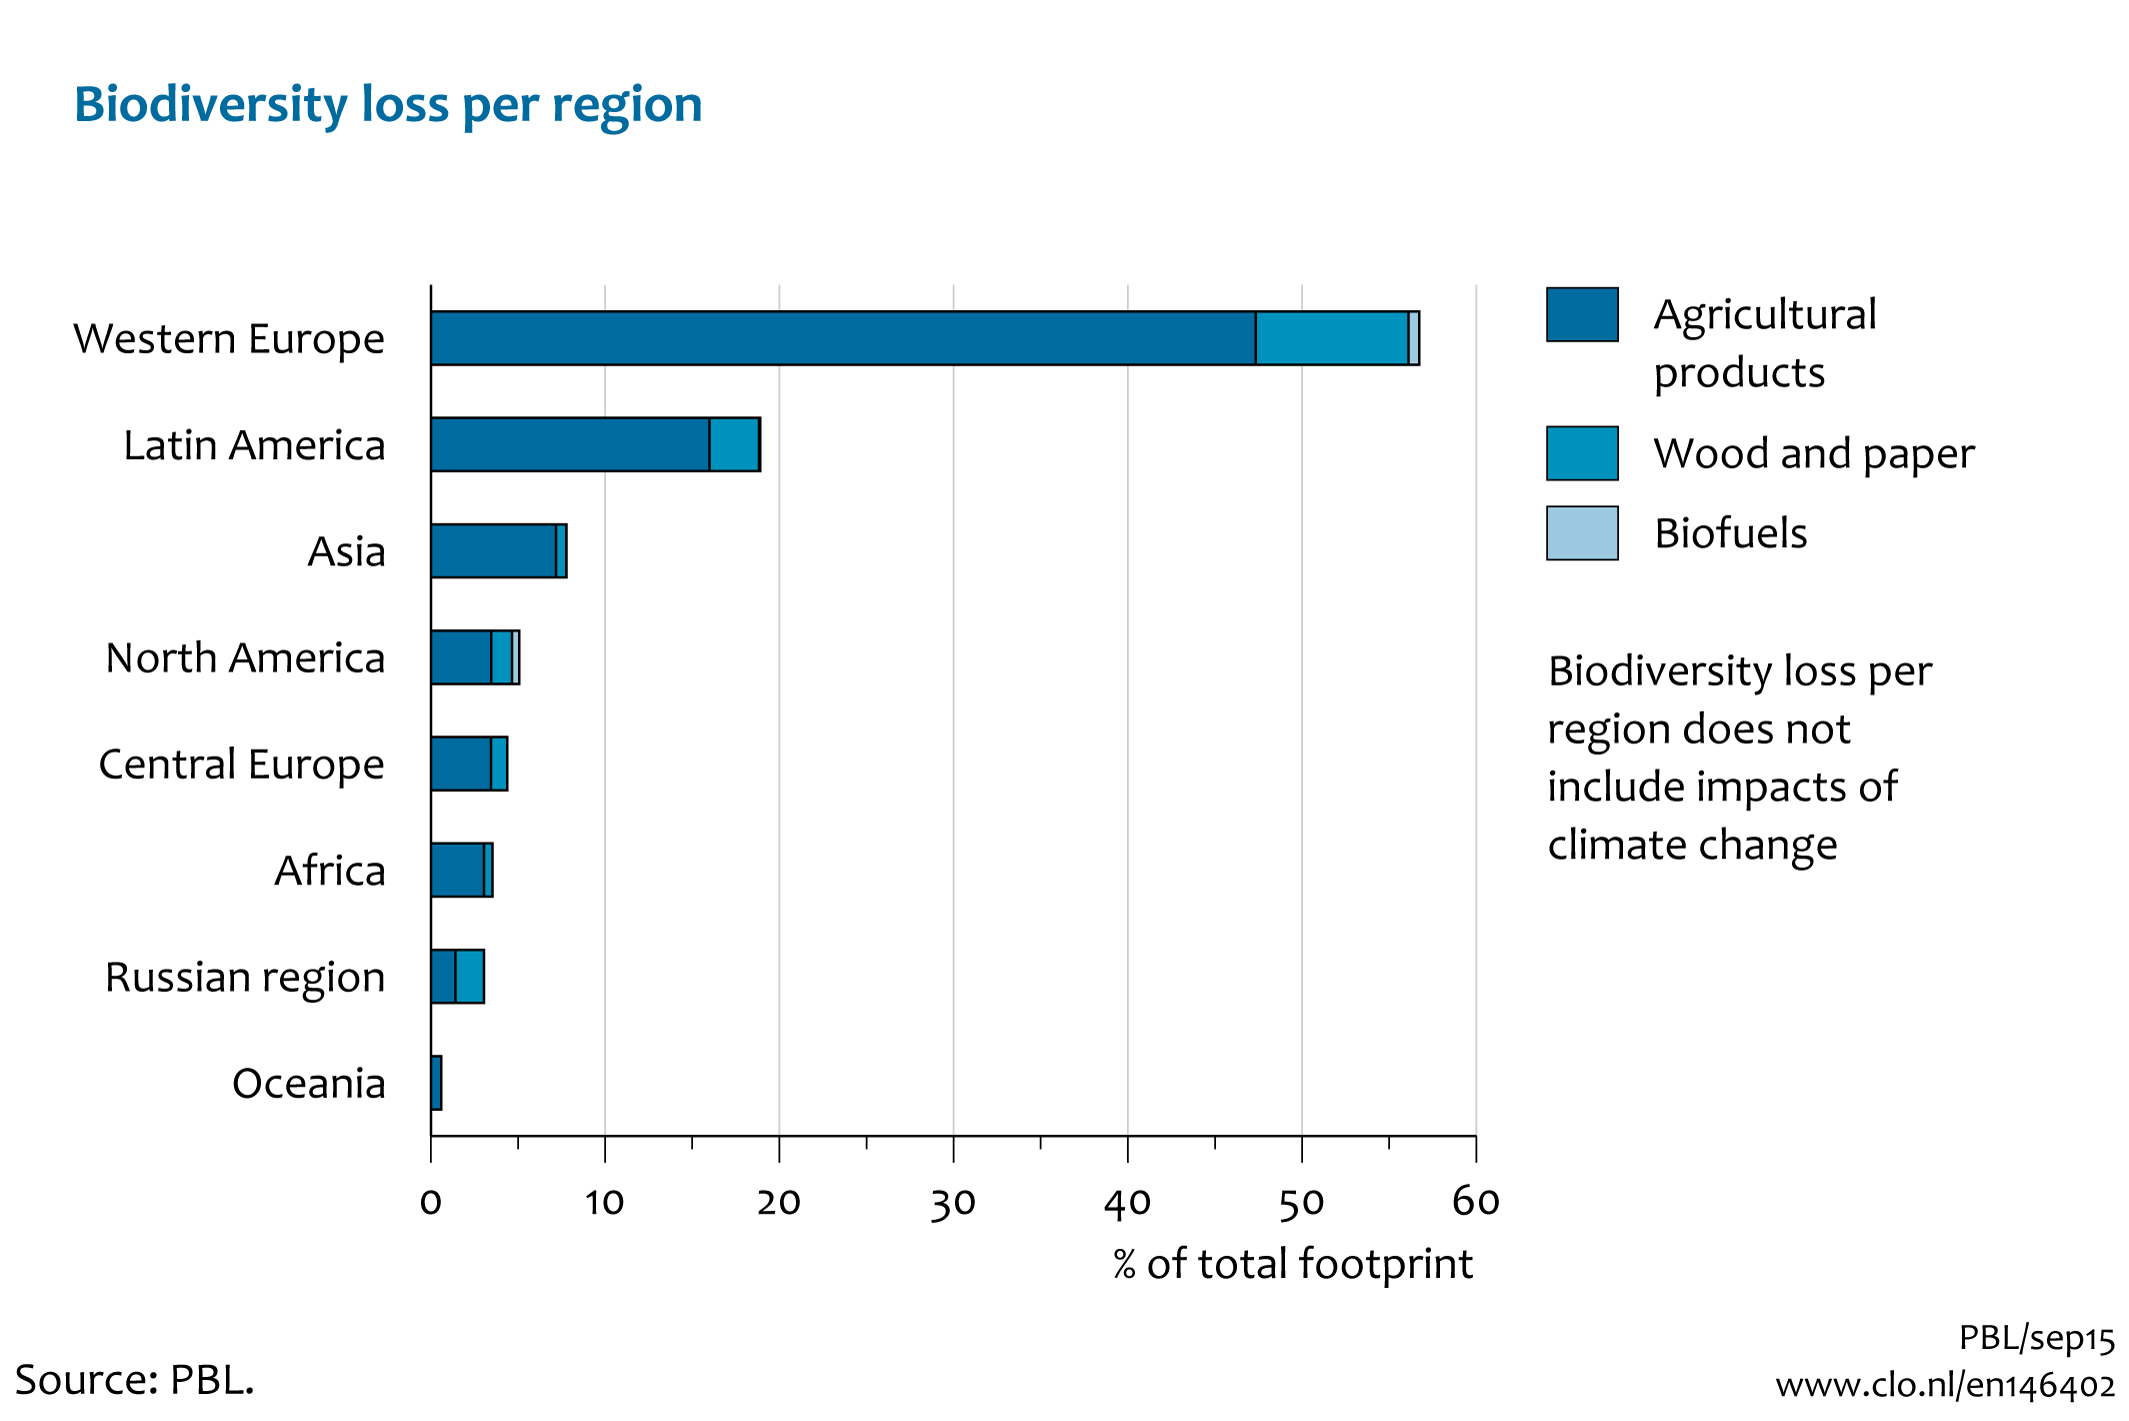 Image Biodiversity loss due to Dutch consumption per region (exclusive impacts of climate change).. The image is further explained in the text.